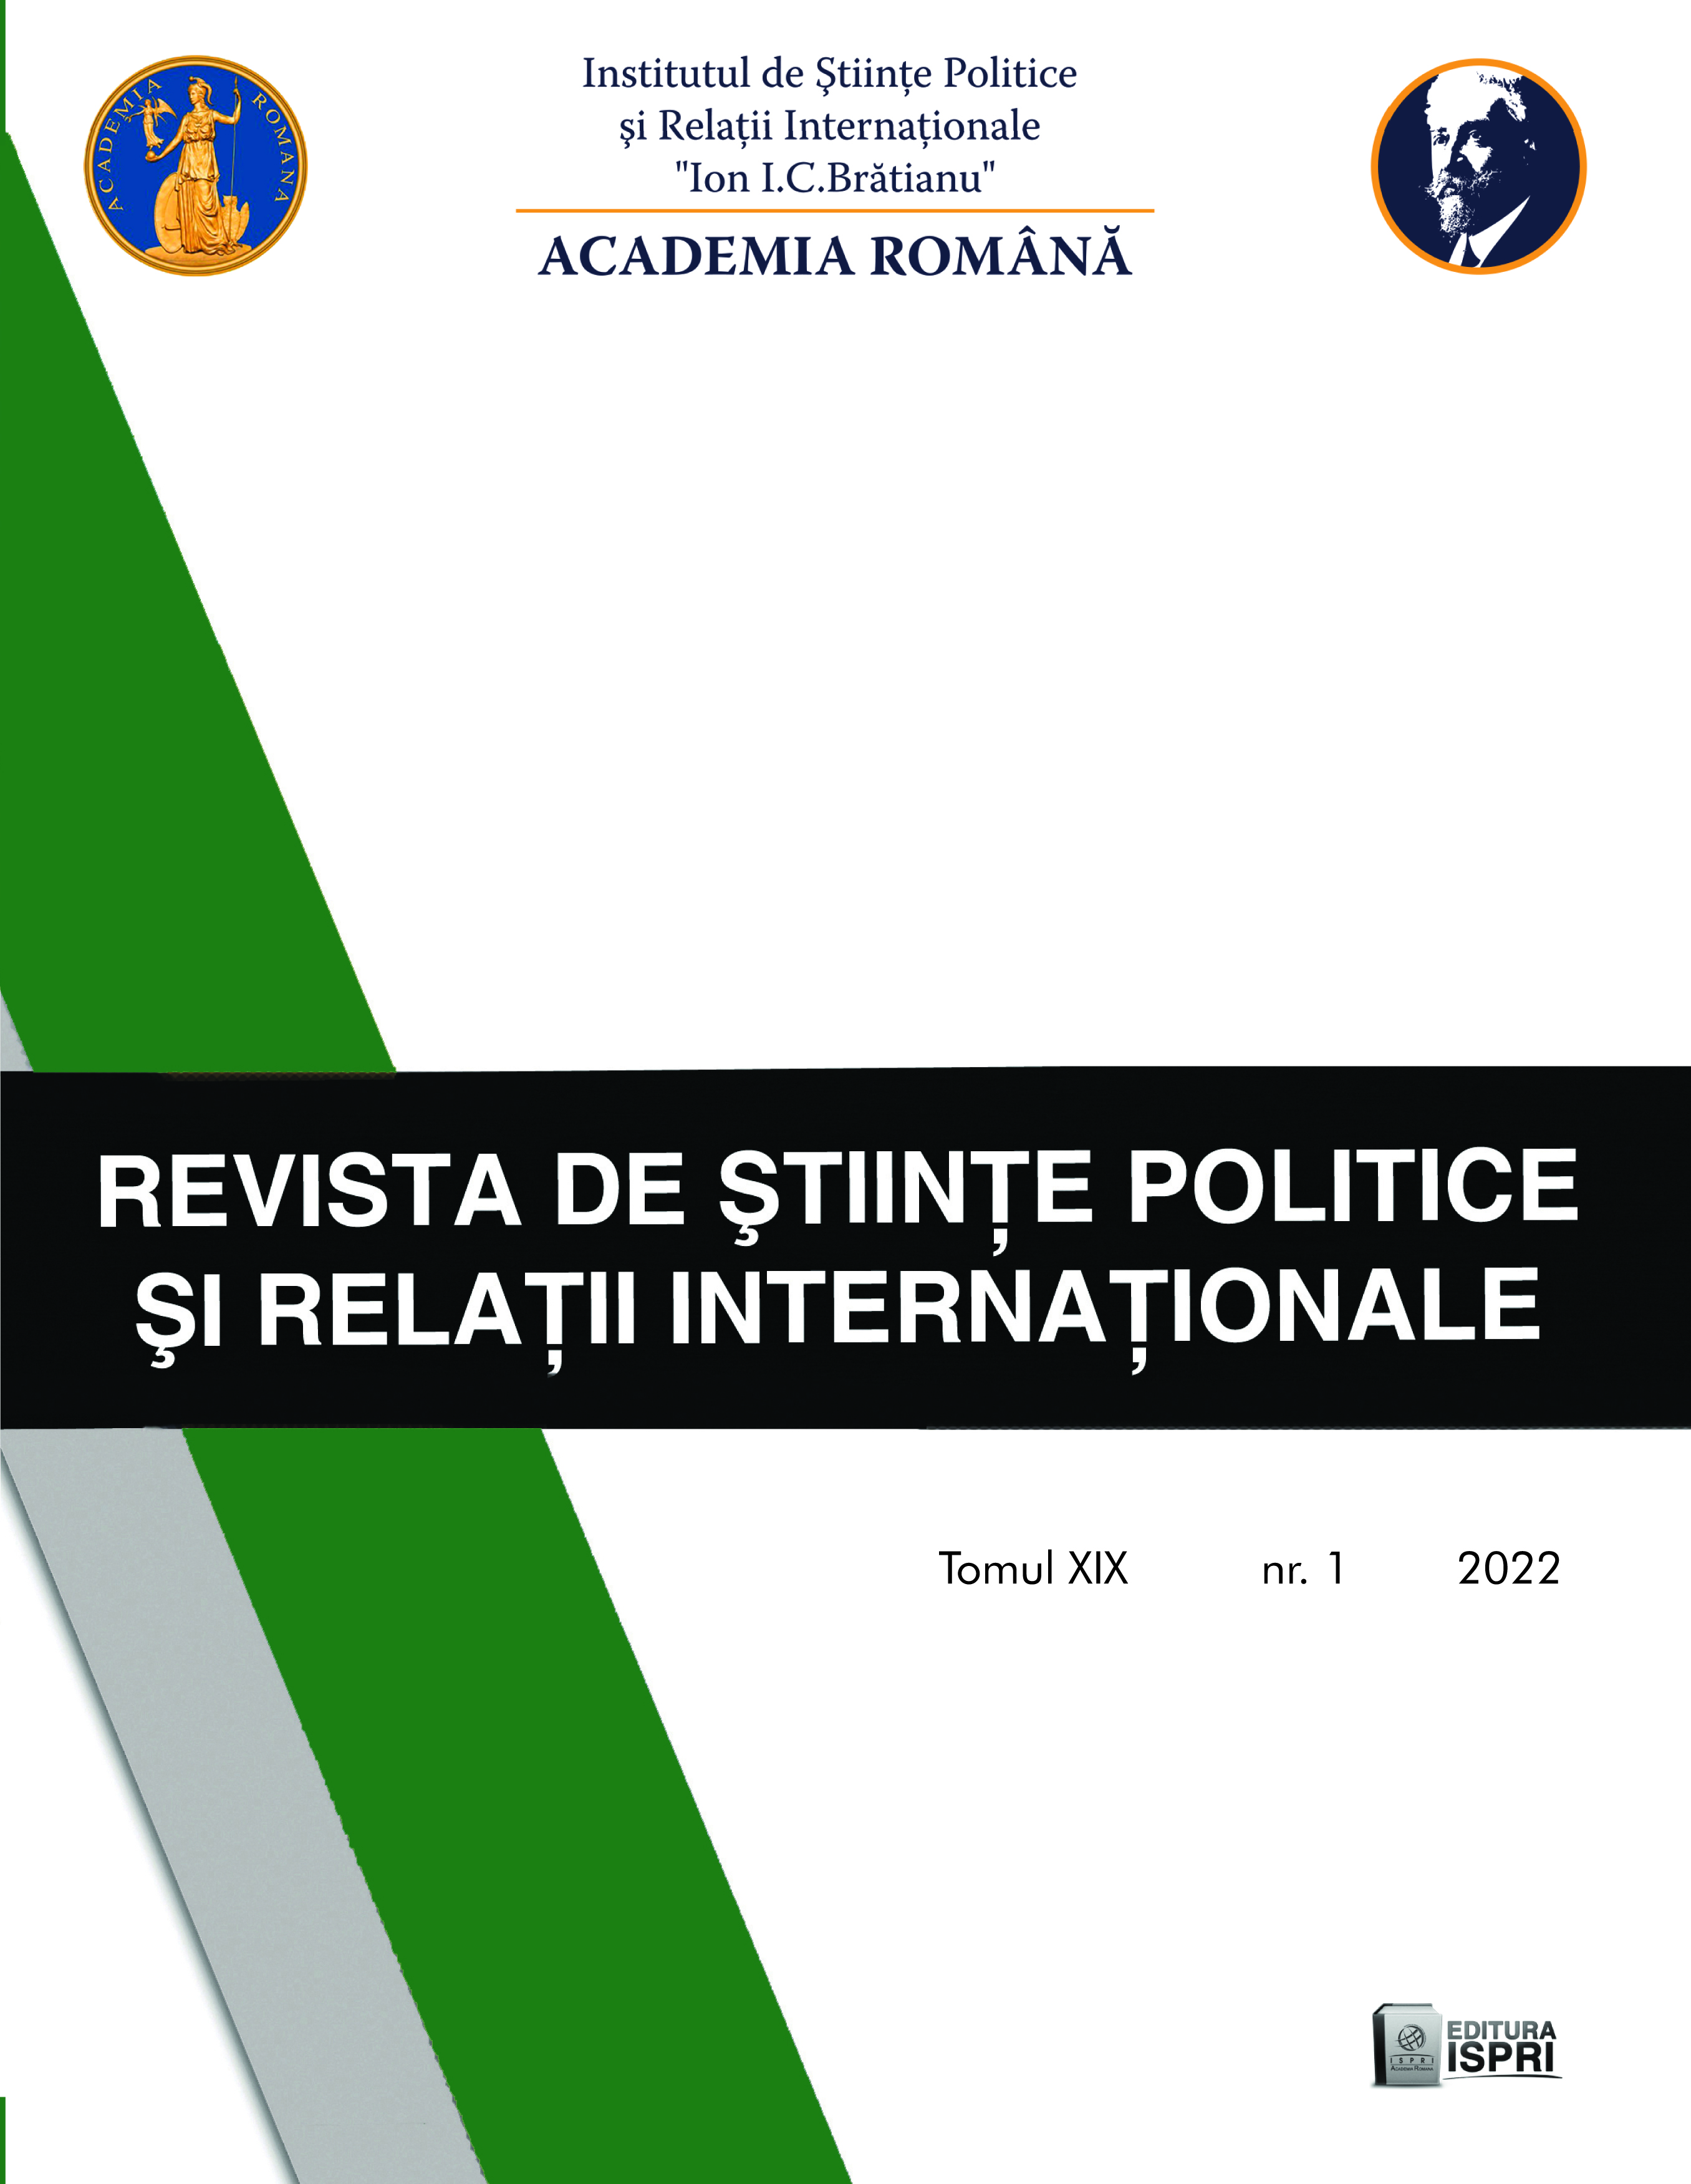 Limitations of Religious Influence in the State Secularization Process Cover Image